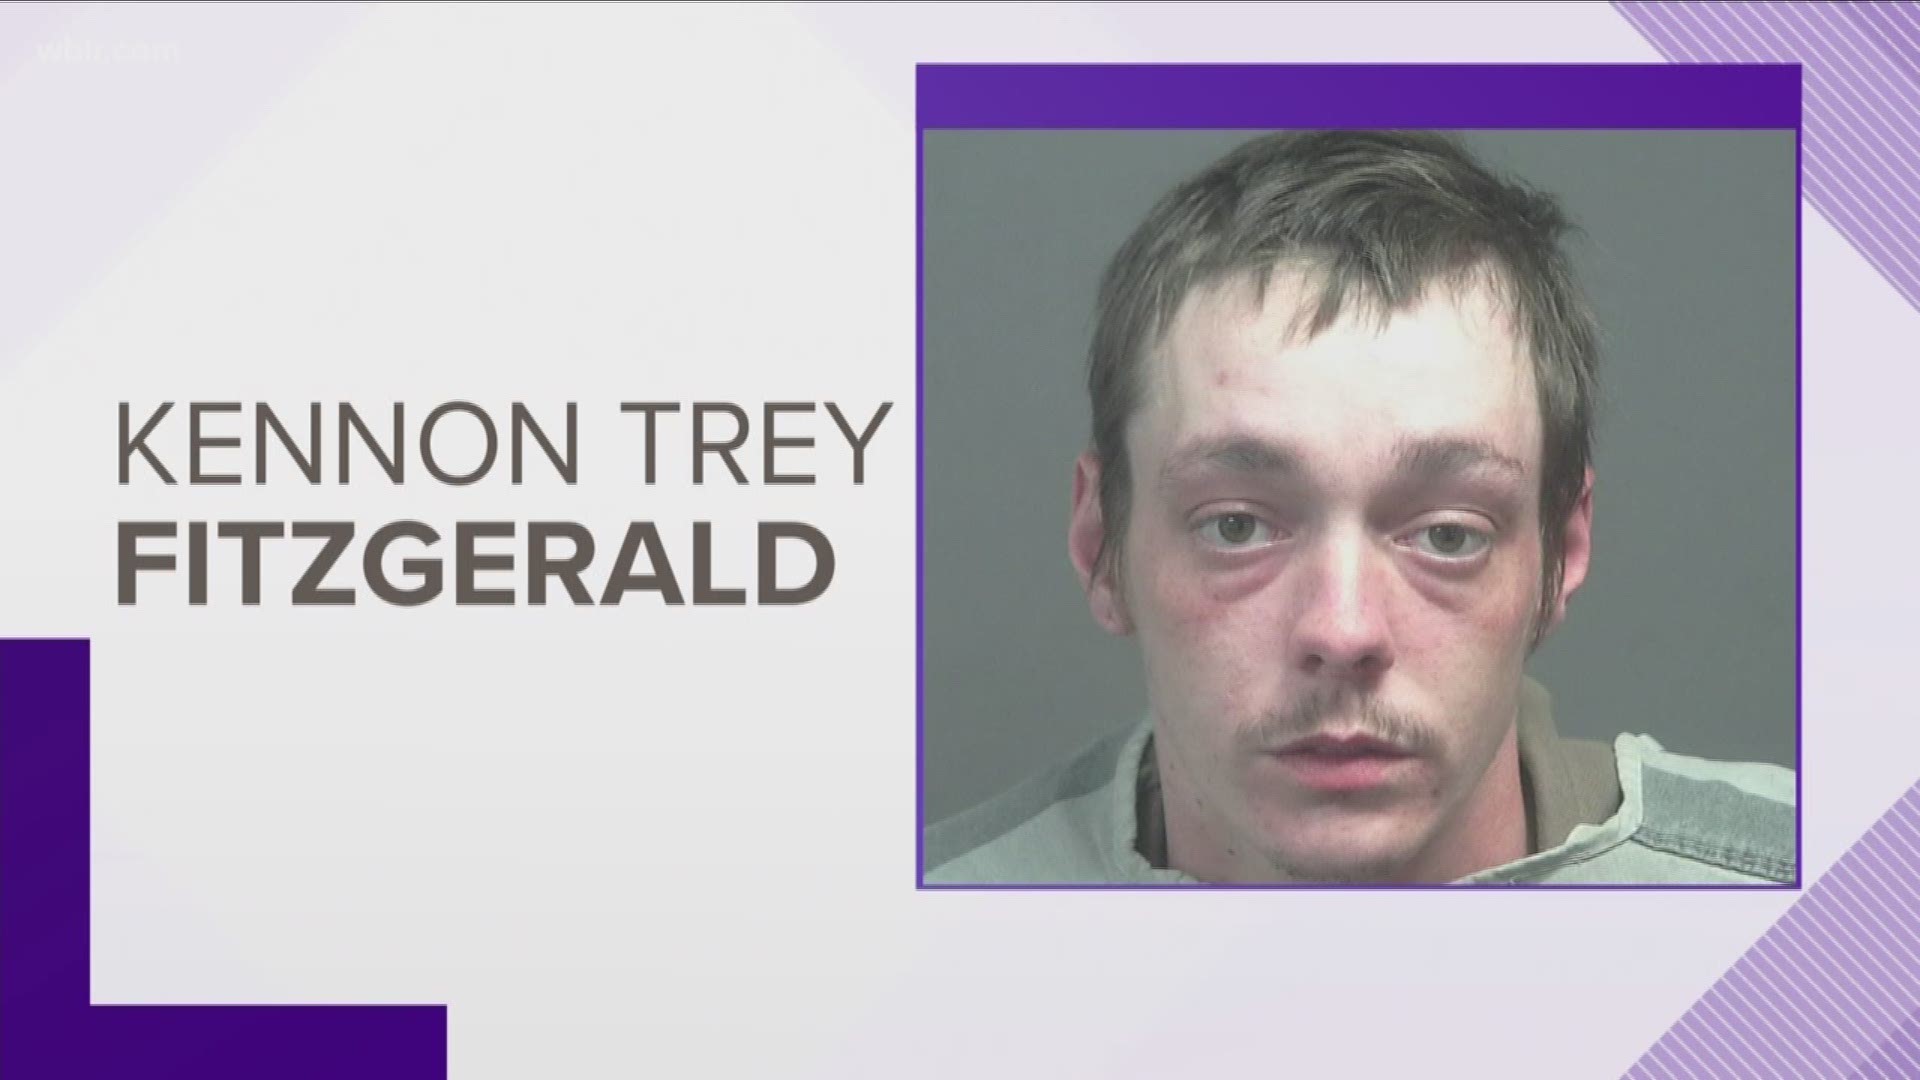 A man told officers that Kennon Trey Fitzgerald, 22, was intoxicated and threatening people with his snake.